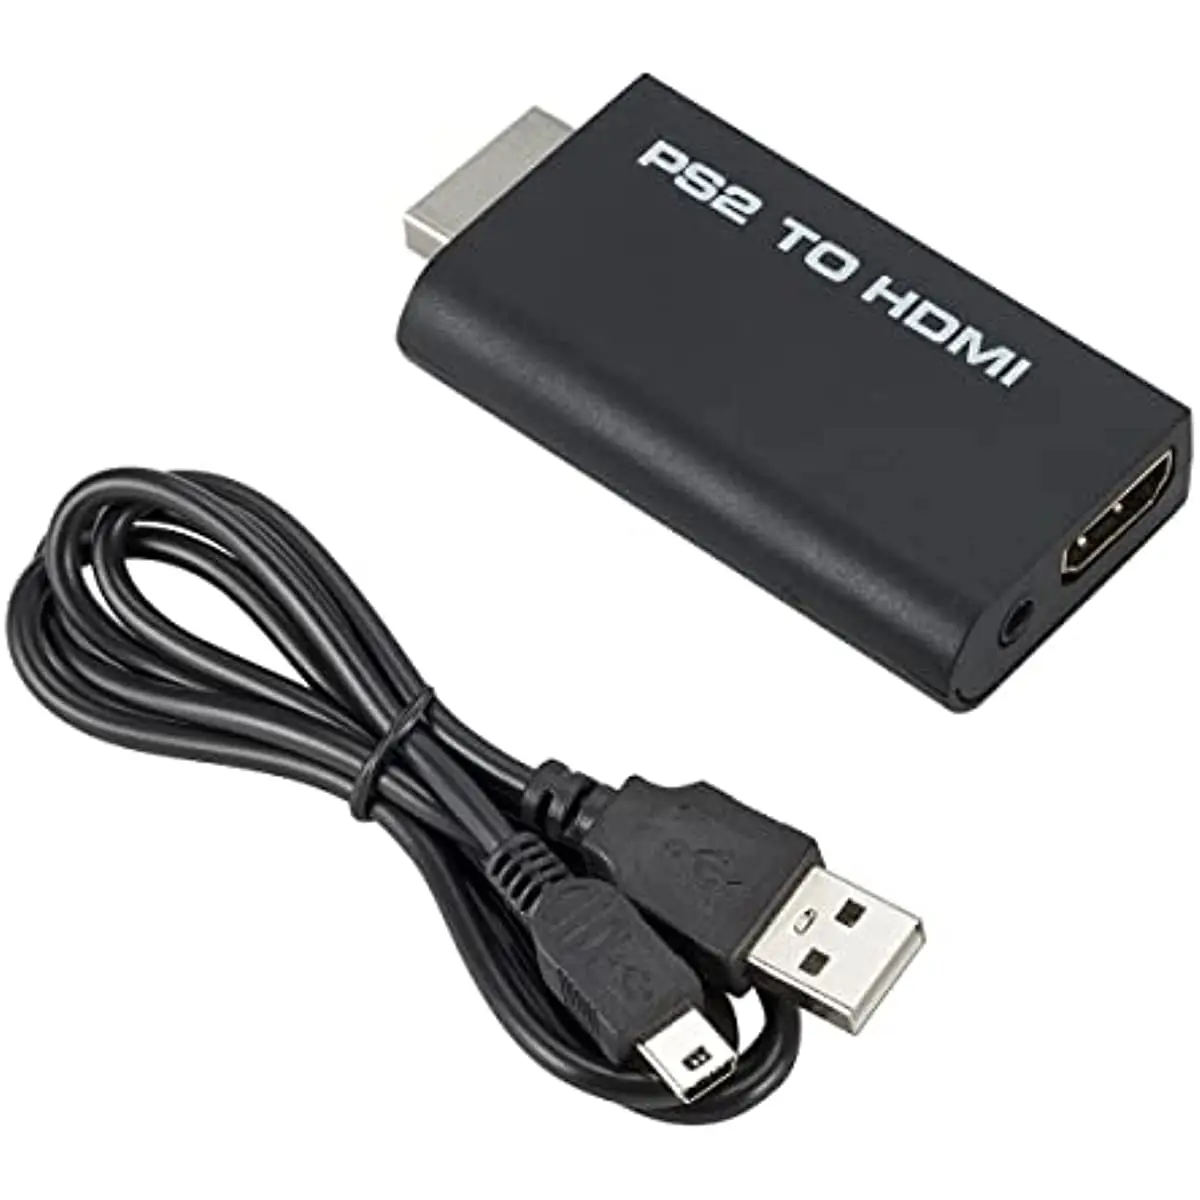 PS2 to HDMI Converter Adapter, Video Converter PS2 to HDMI with 3.5mm Audio Output for HDTV HDMI Monitor Supports All PS2